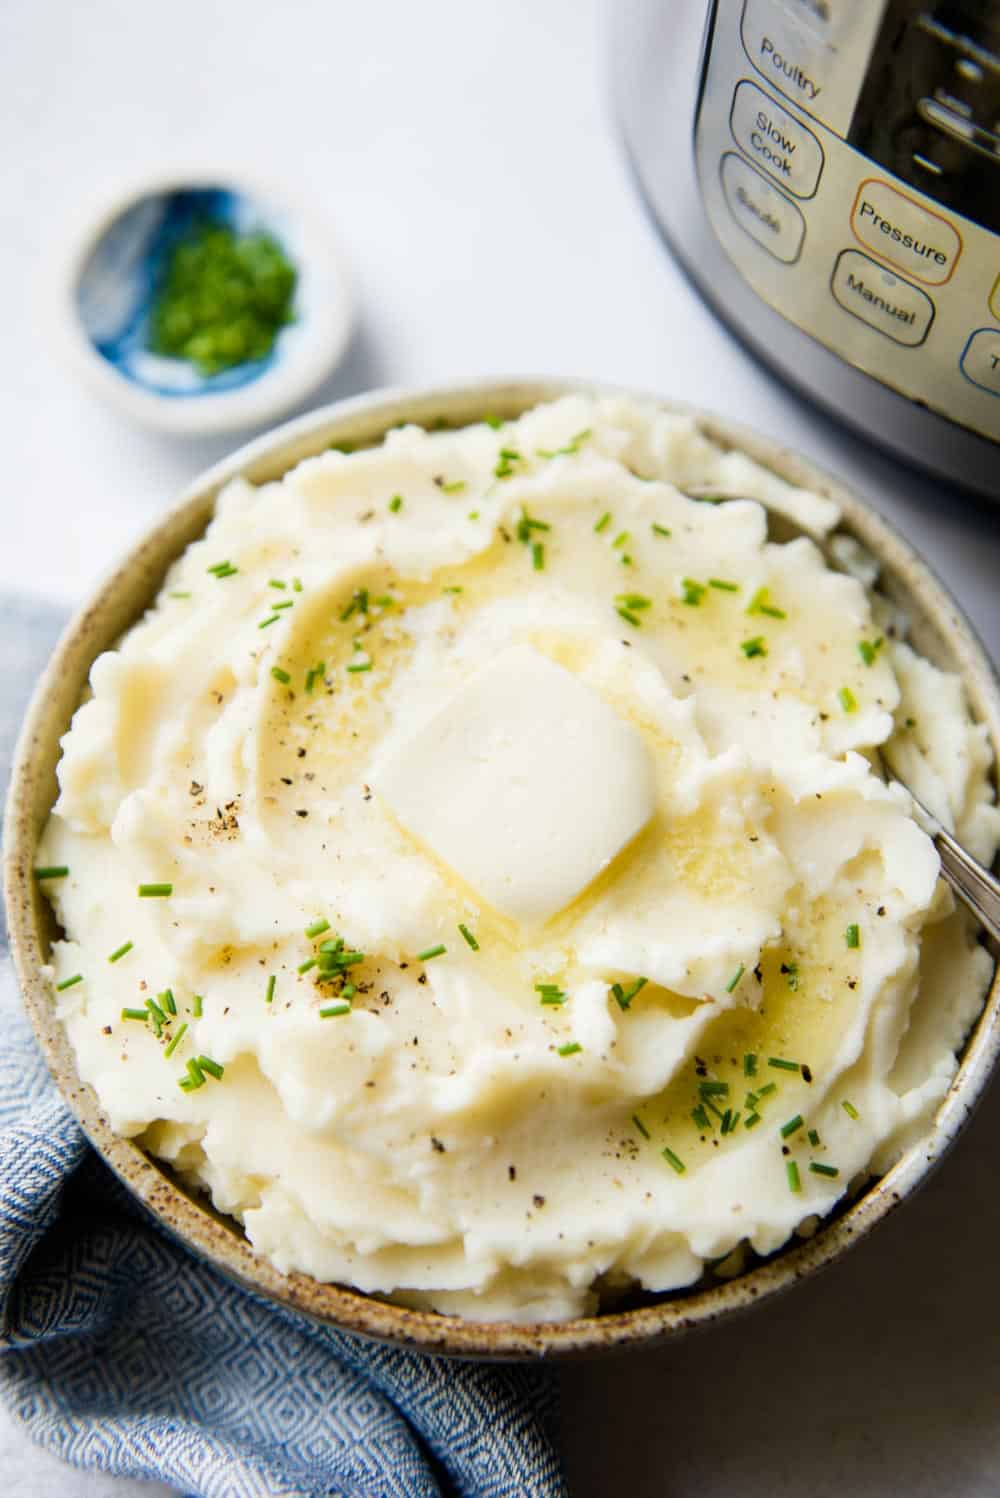 Mashed Potatoes with Instant Pot in background